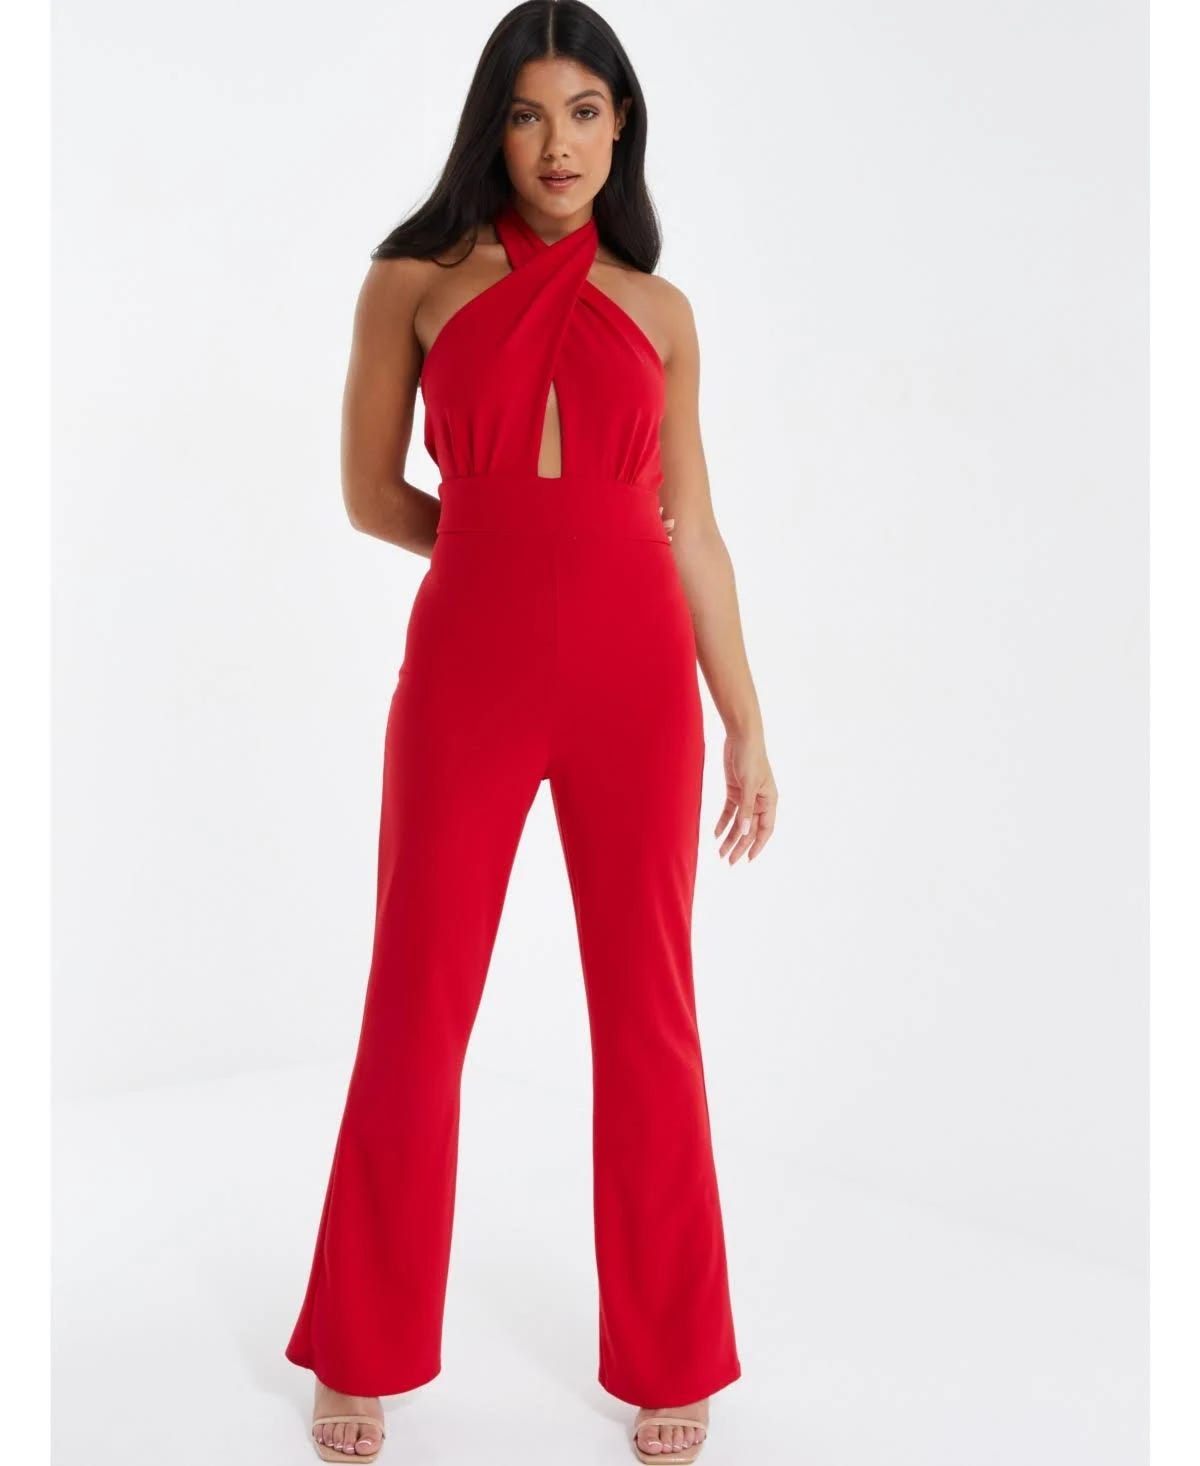 Red Halter Neck Palazzo Jumpsuit by Quiz Clothing | Image